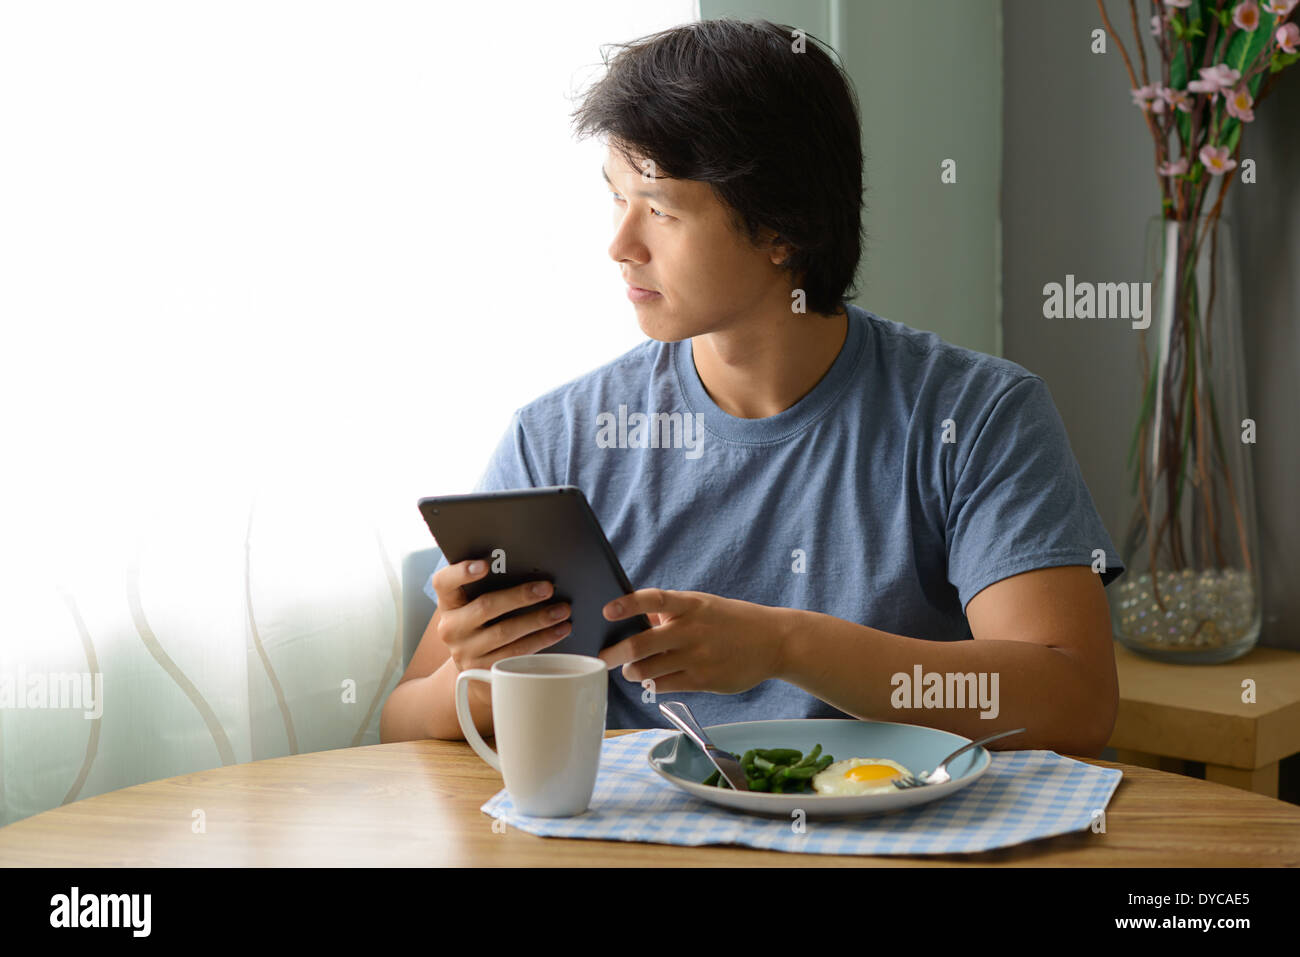 Asian man holding an ipad having breakfast, sitting and looking out the window daydreaming, thinking. Stock Photo